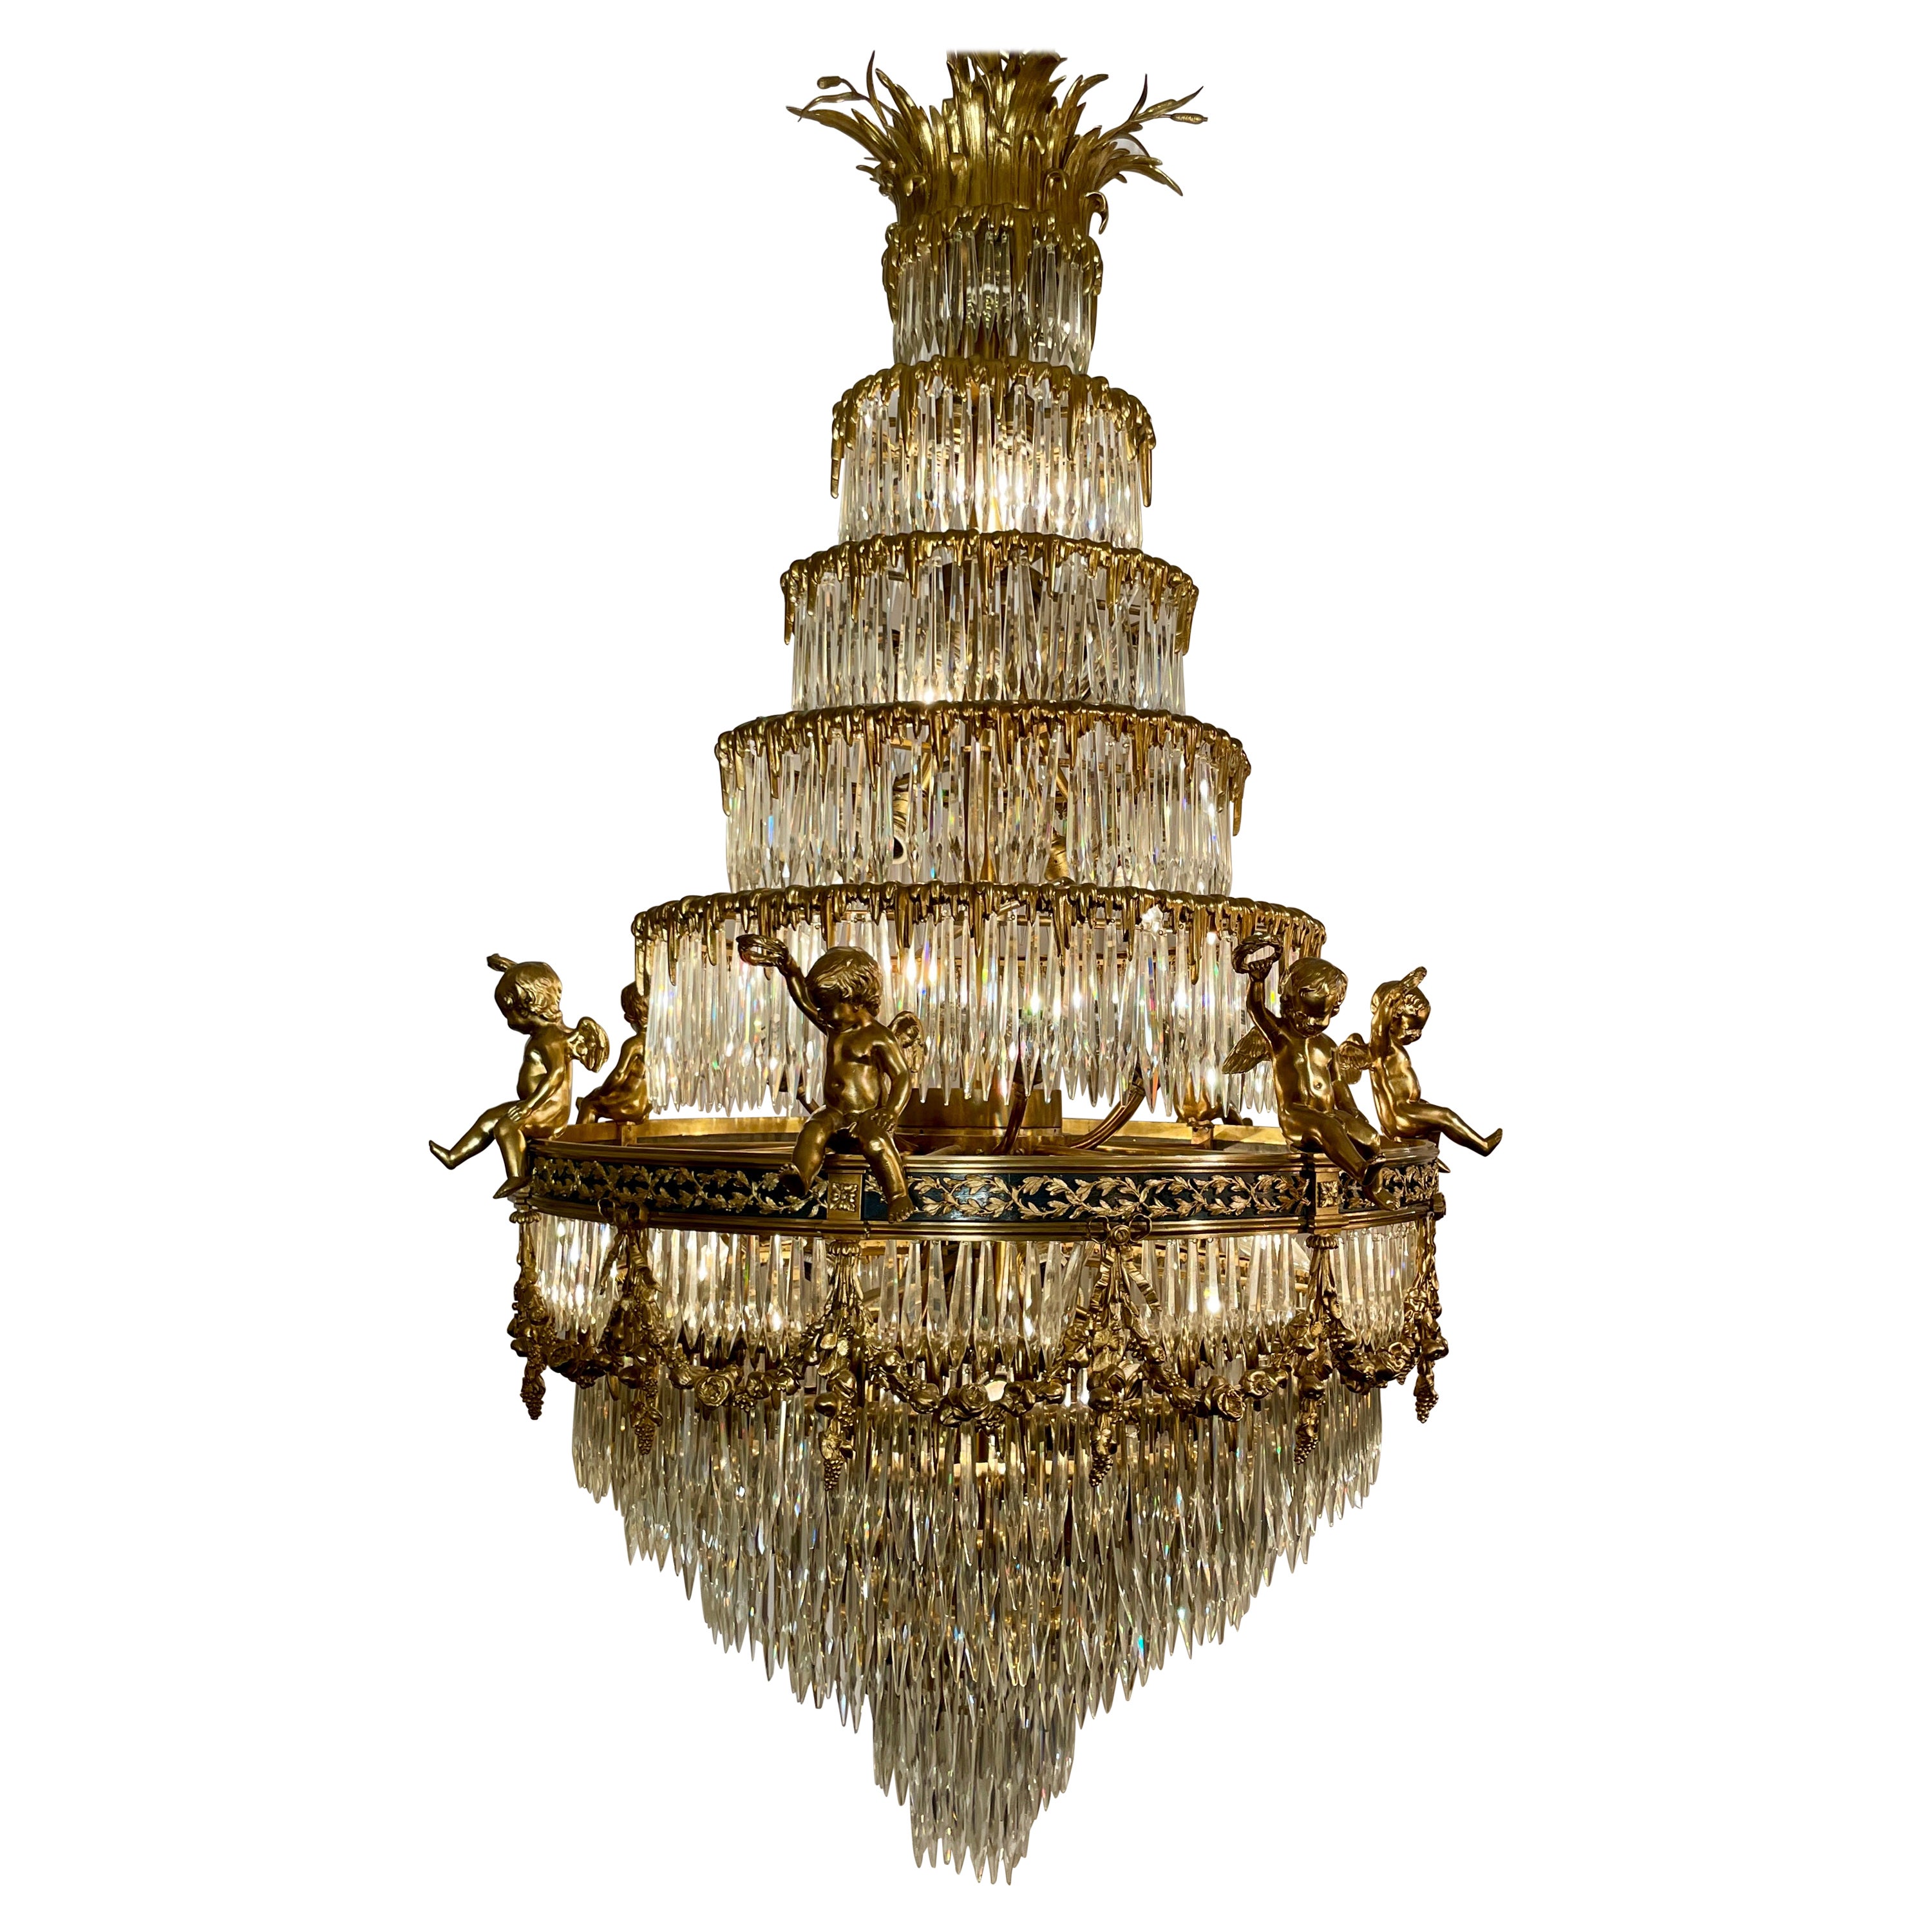 Antique French Baccarat Crystal & Bronze D'Ore Waterfall Chandelier, Circa 1880s For Sale